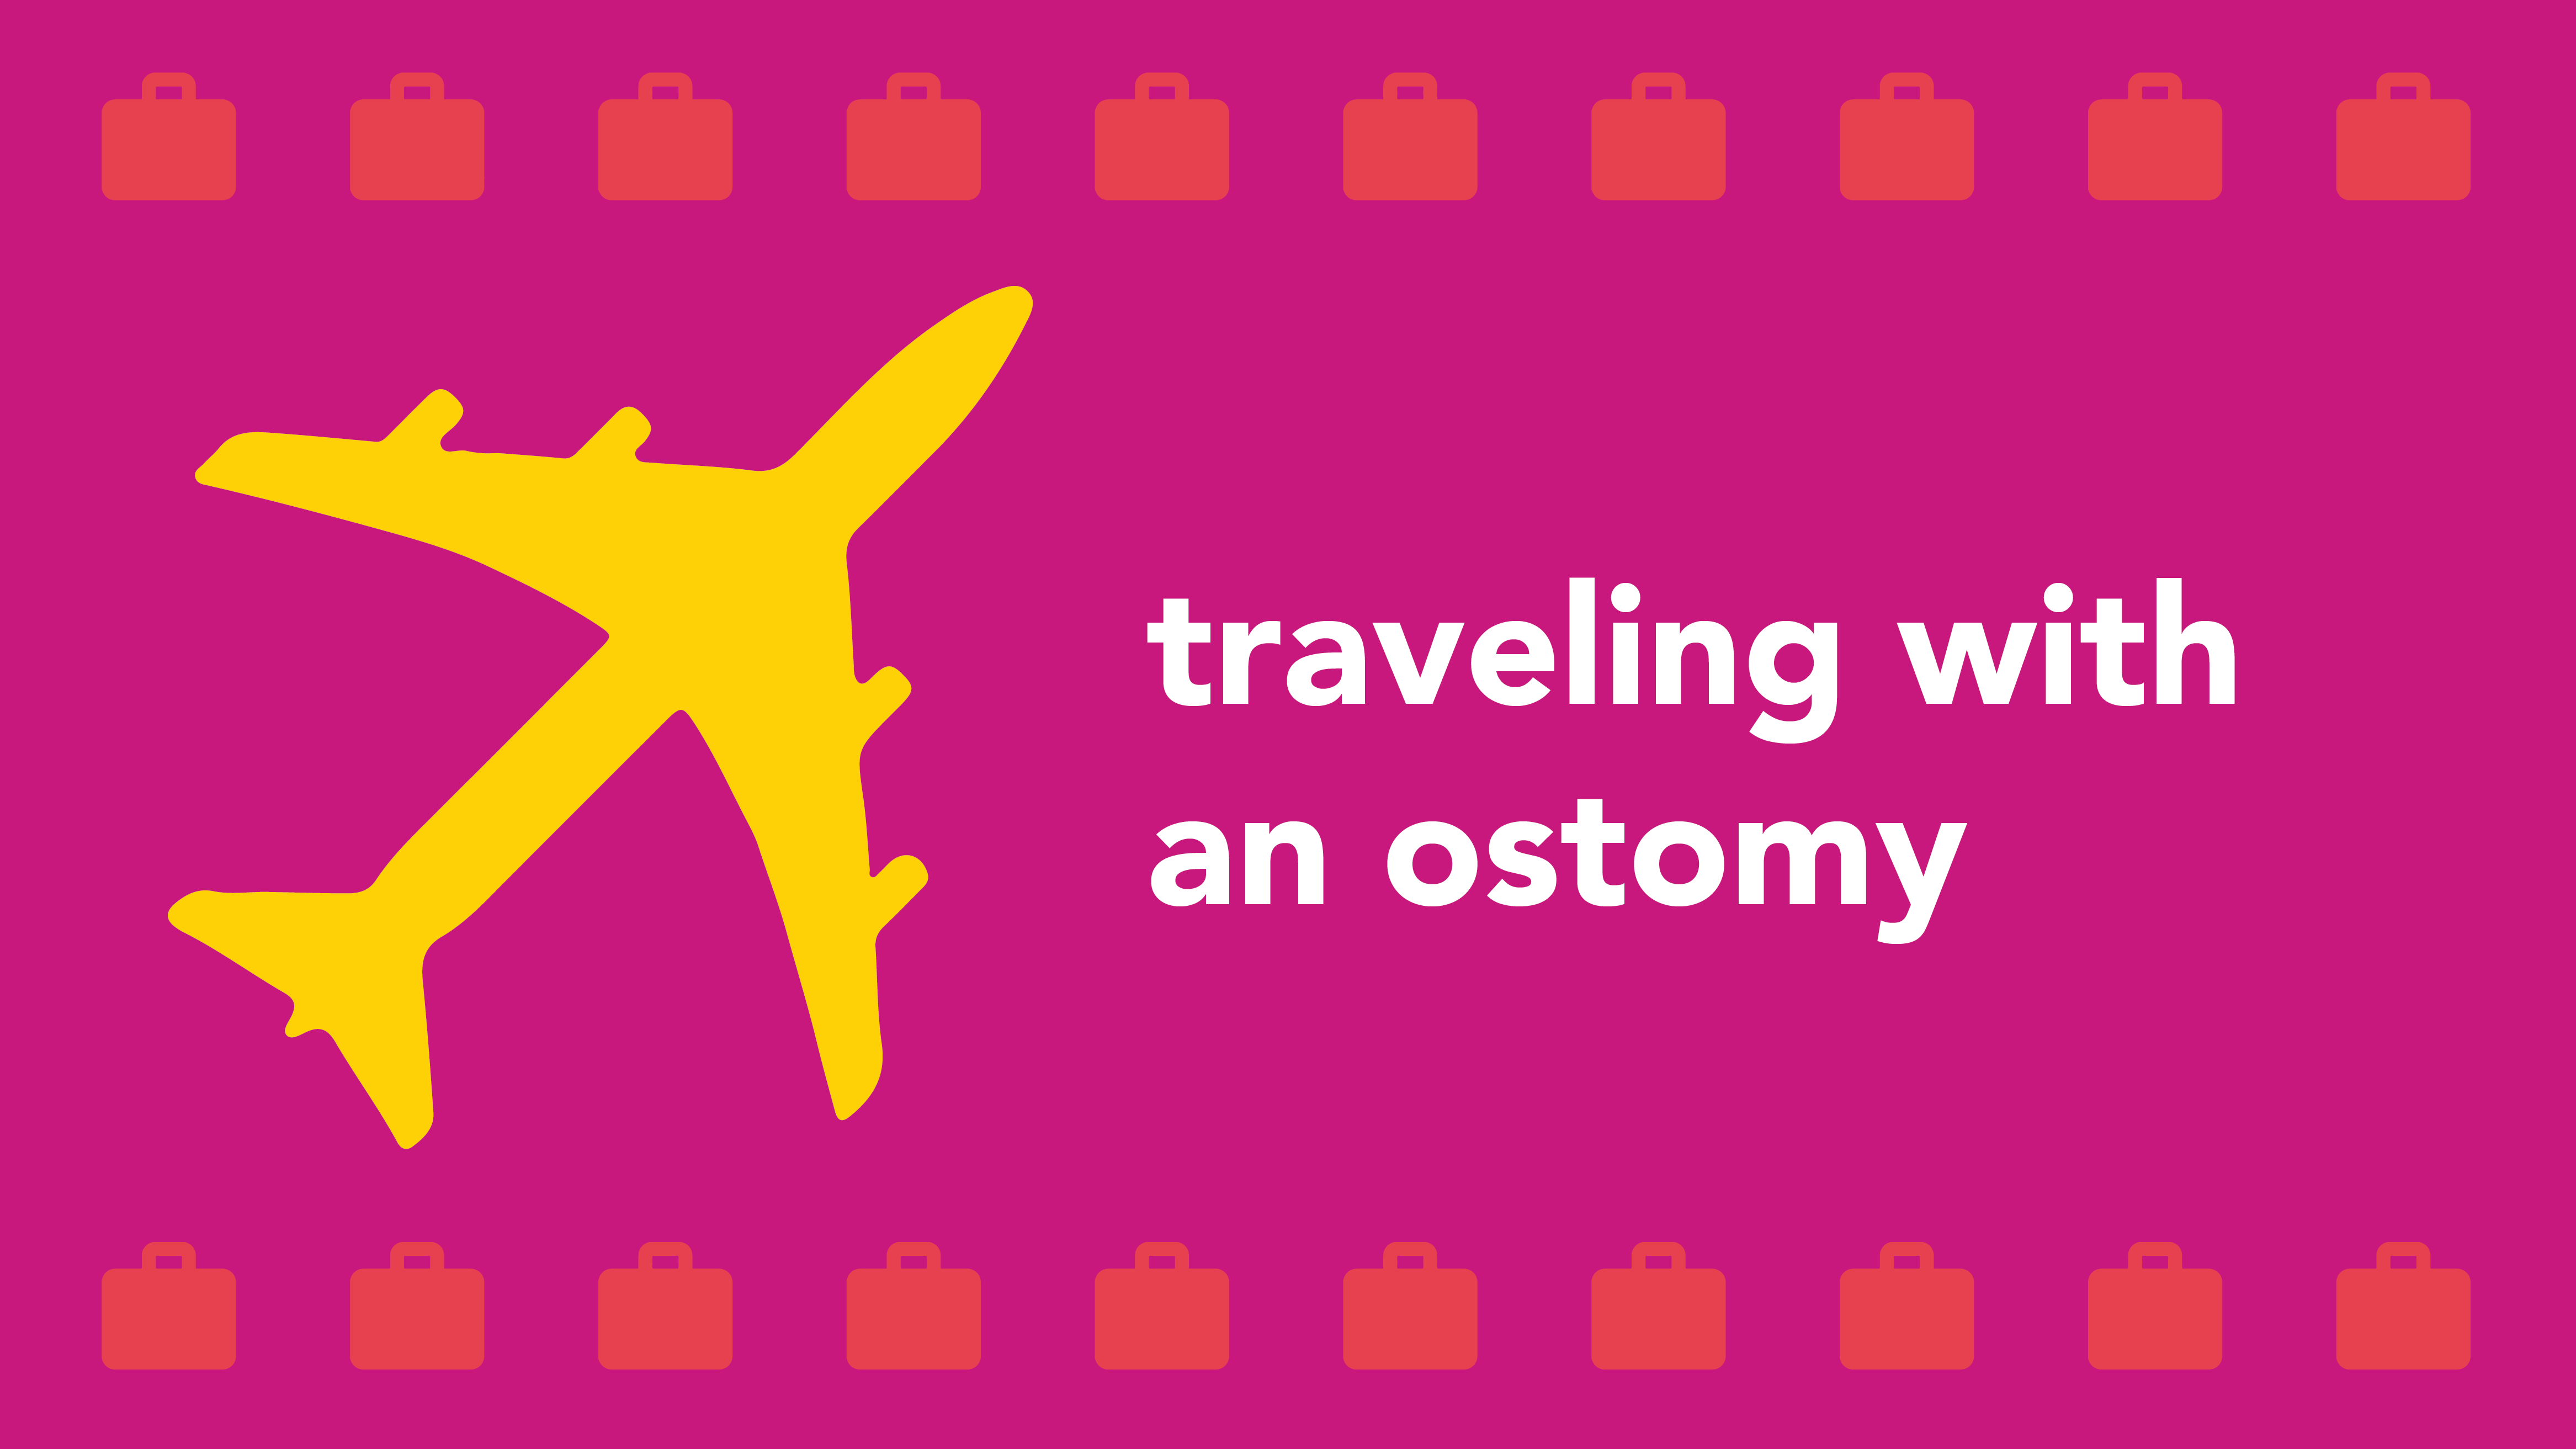 Travel with an Ostomy